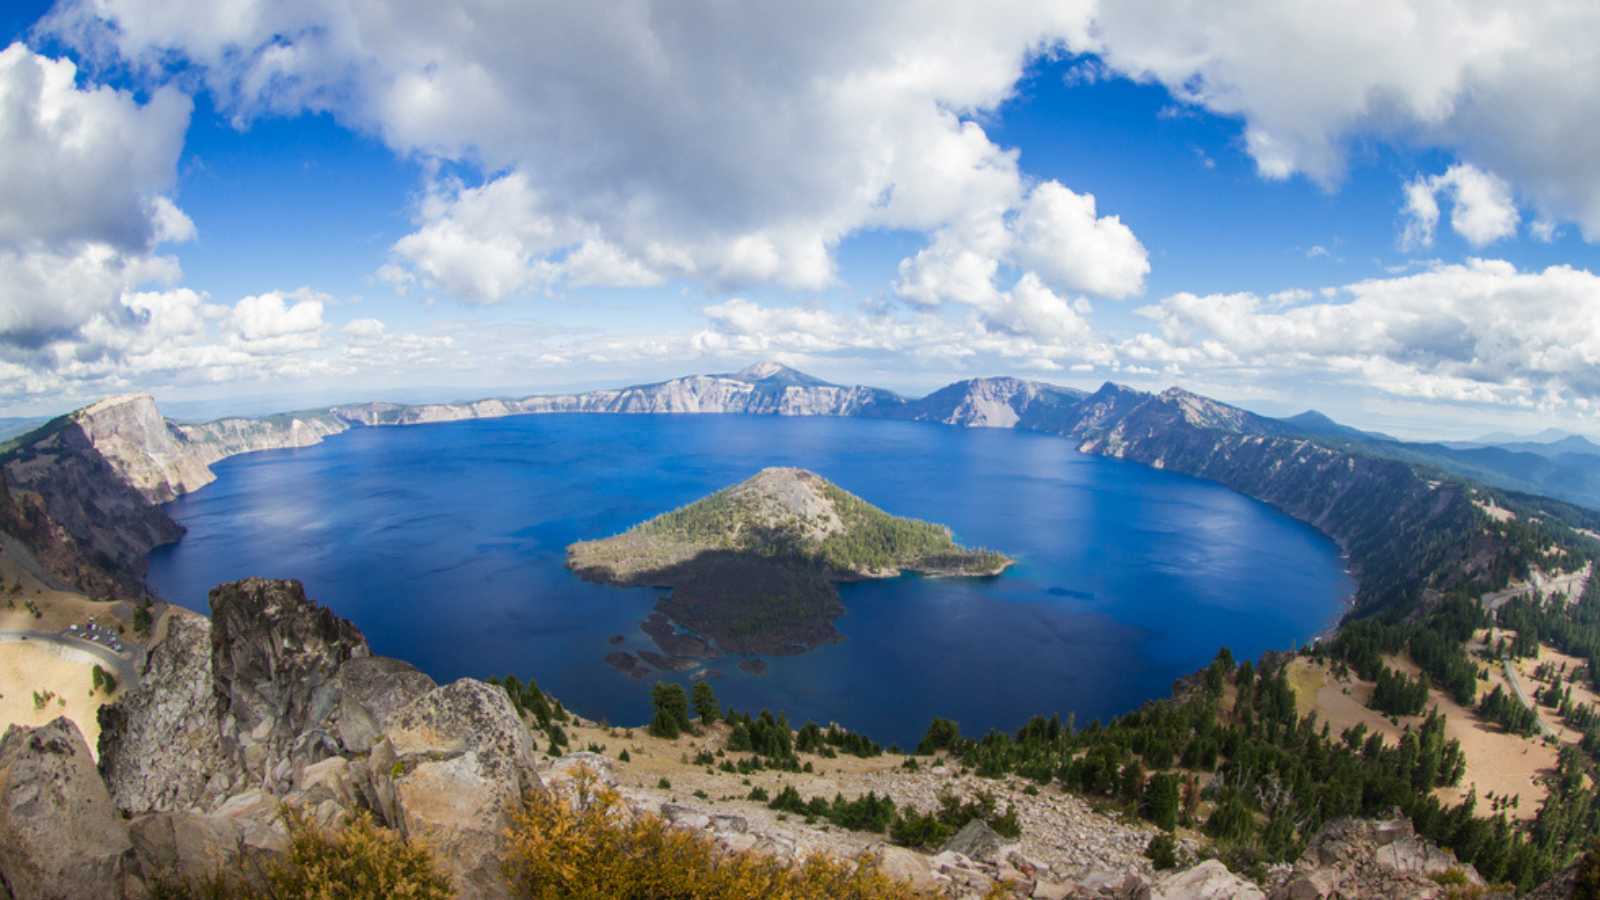 <p>Part of Crater Lake National Park, the park's main feature is the eye-capturing Crater Lake. The lake is famous for its stunning deep blue coloring and appealing clarity, but that’s not all. Crater Lake is also widely known as the deepest lake in the United States and one of the top ten in the world!</p>